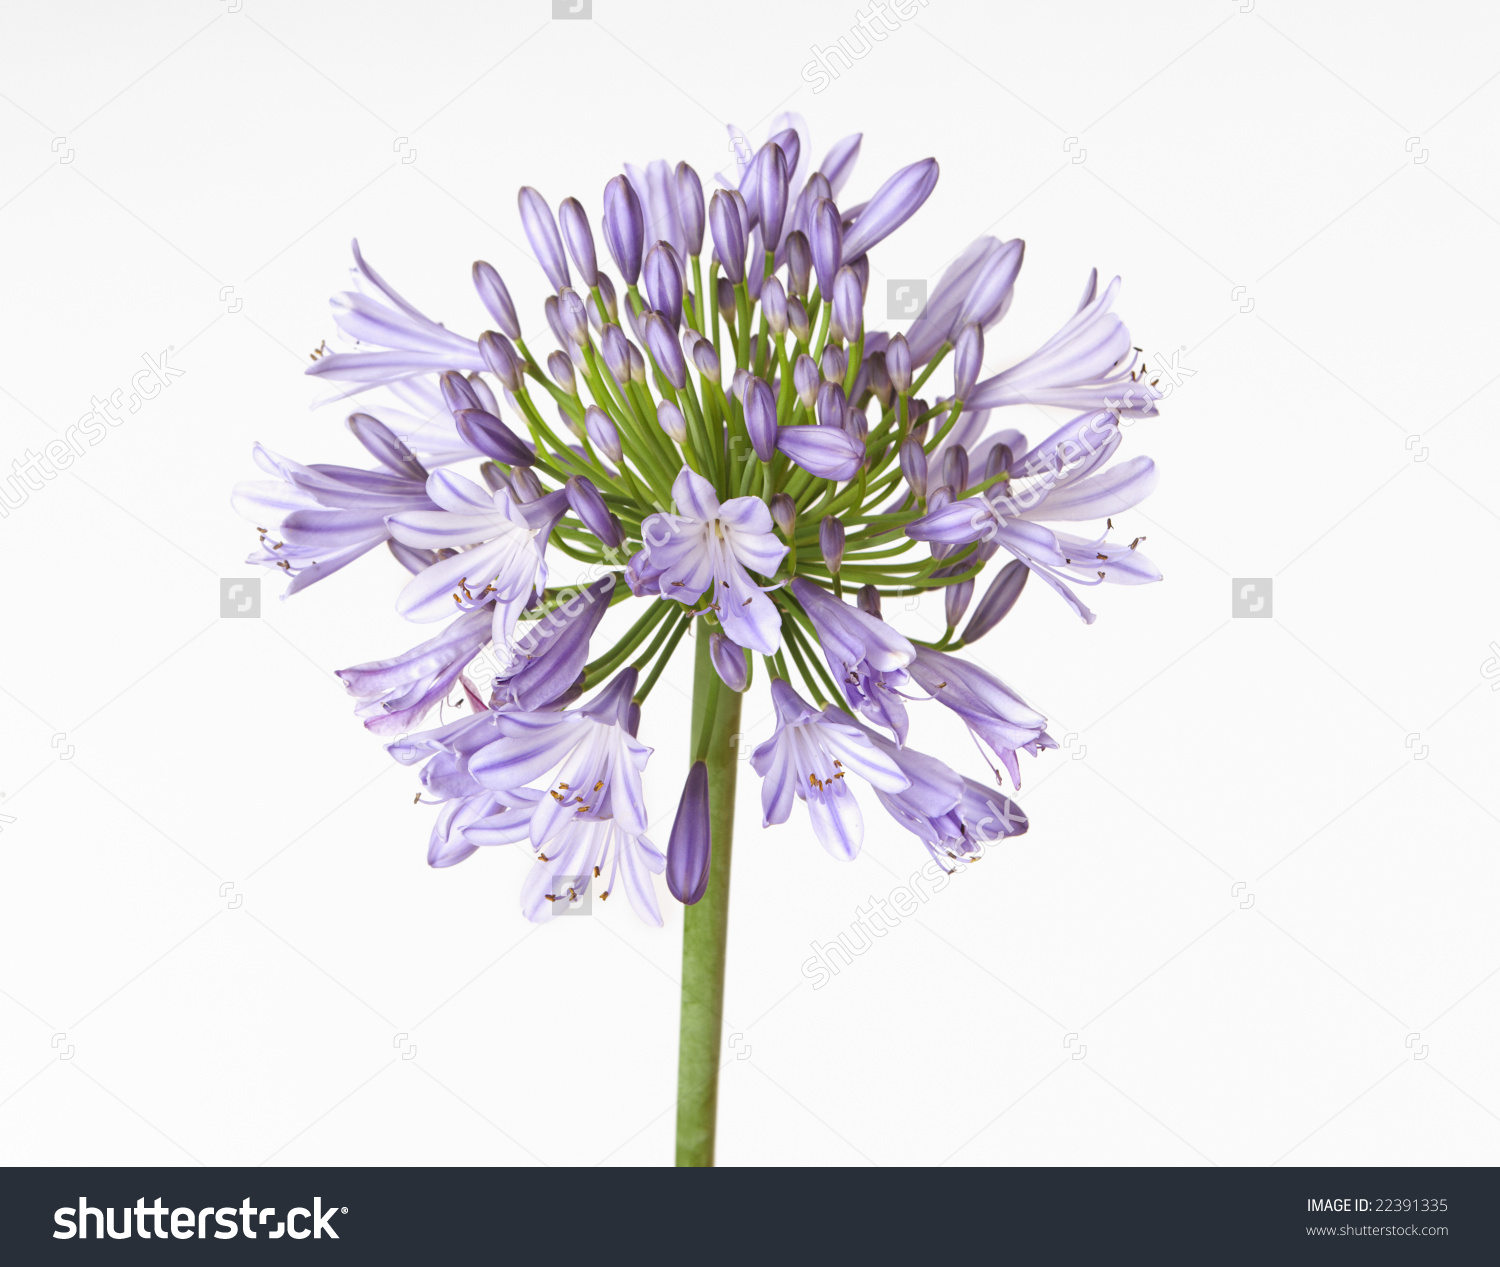 Agapanthus clipart #4, Download drawings